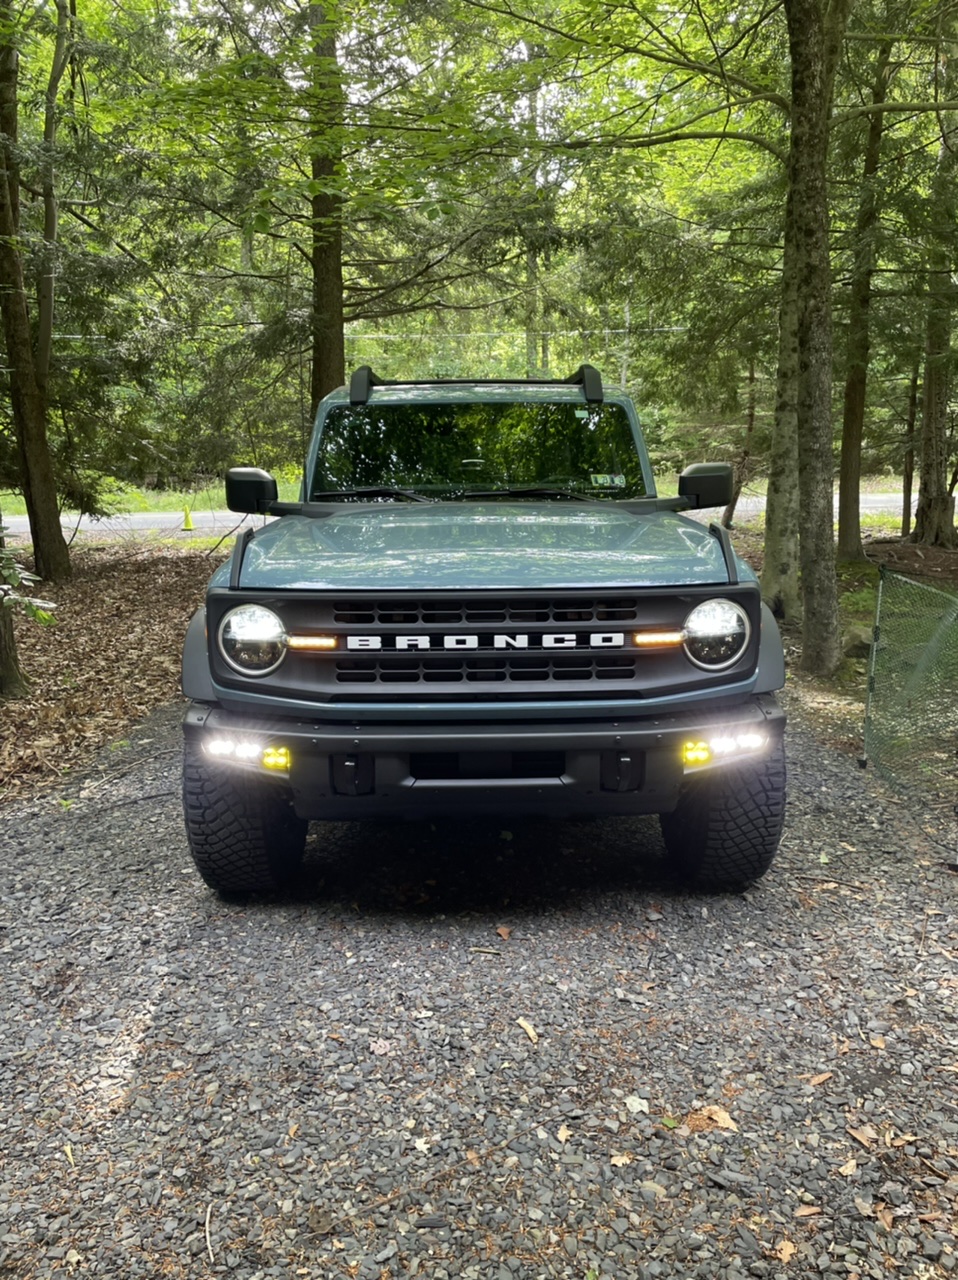 Ford Bronco Looking for suggestions - mod bumper fog lights E45D3BEE-CD5A-40C0-9608-D3C3D779A2D6